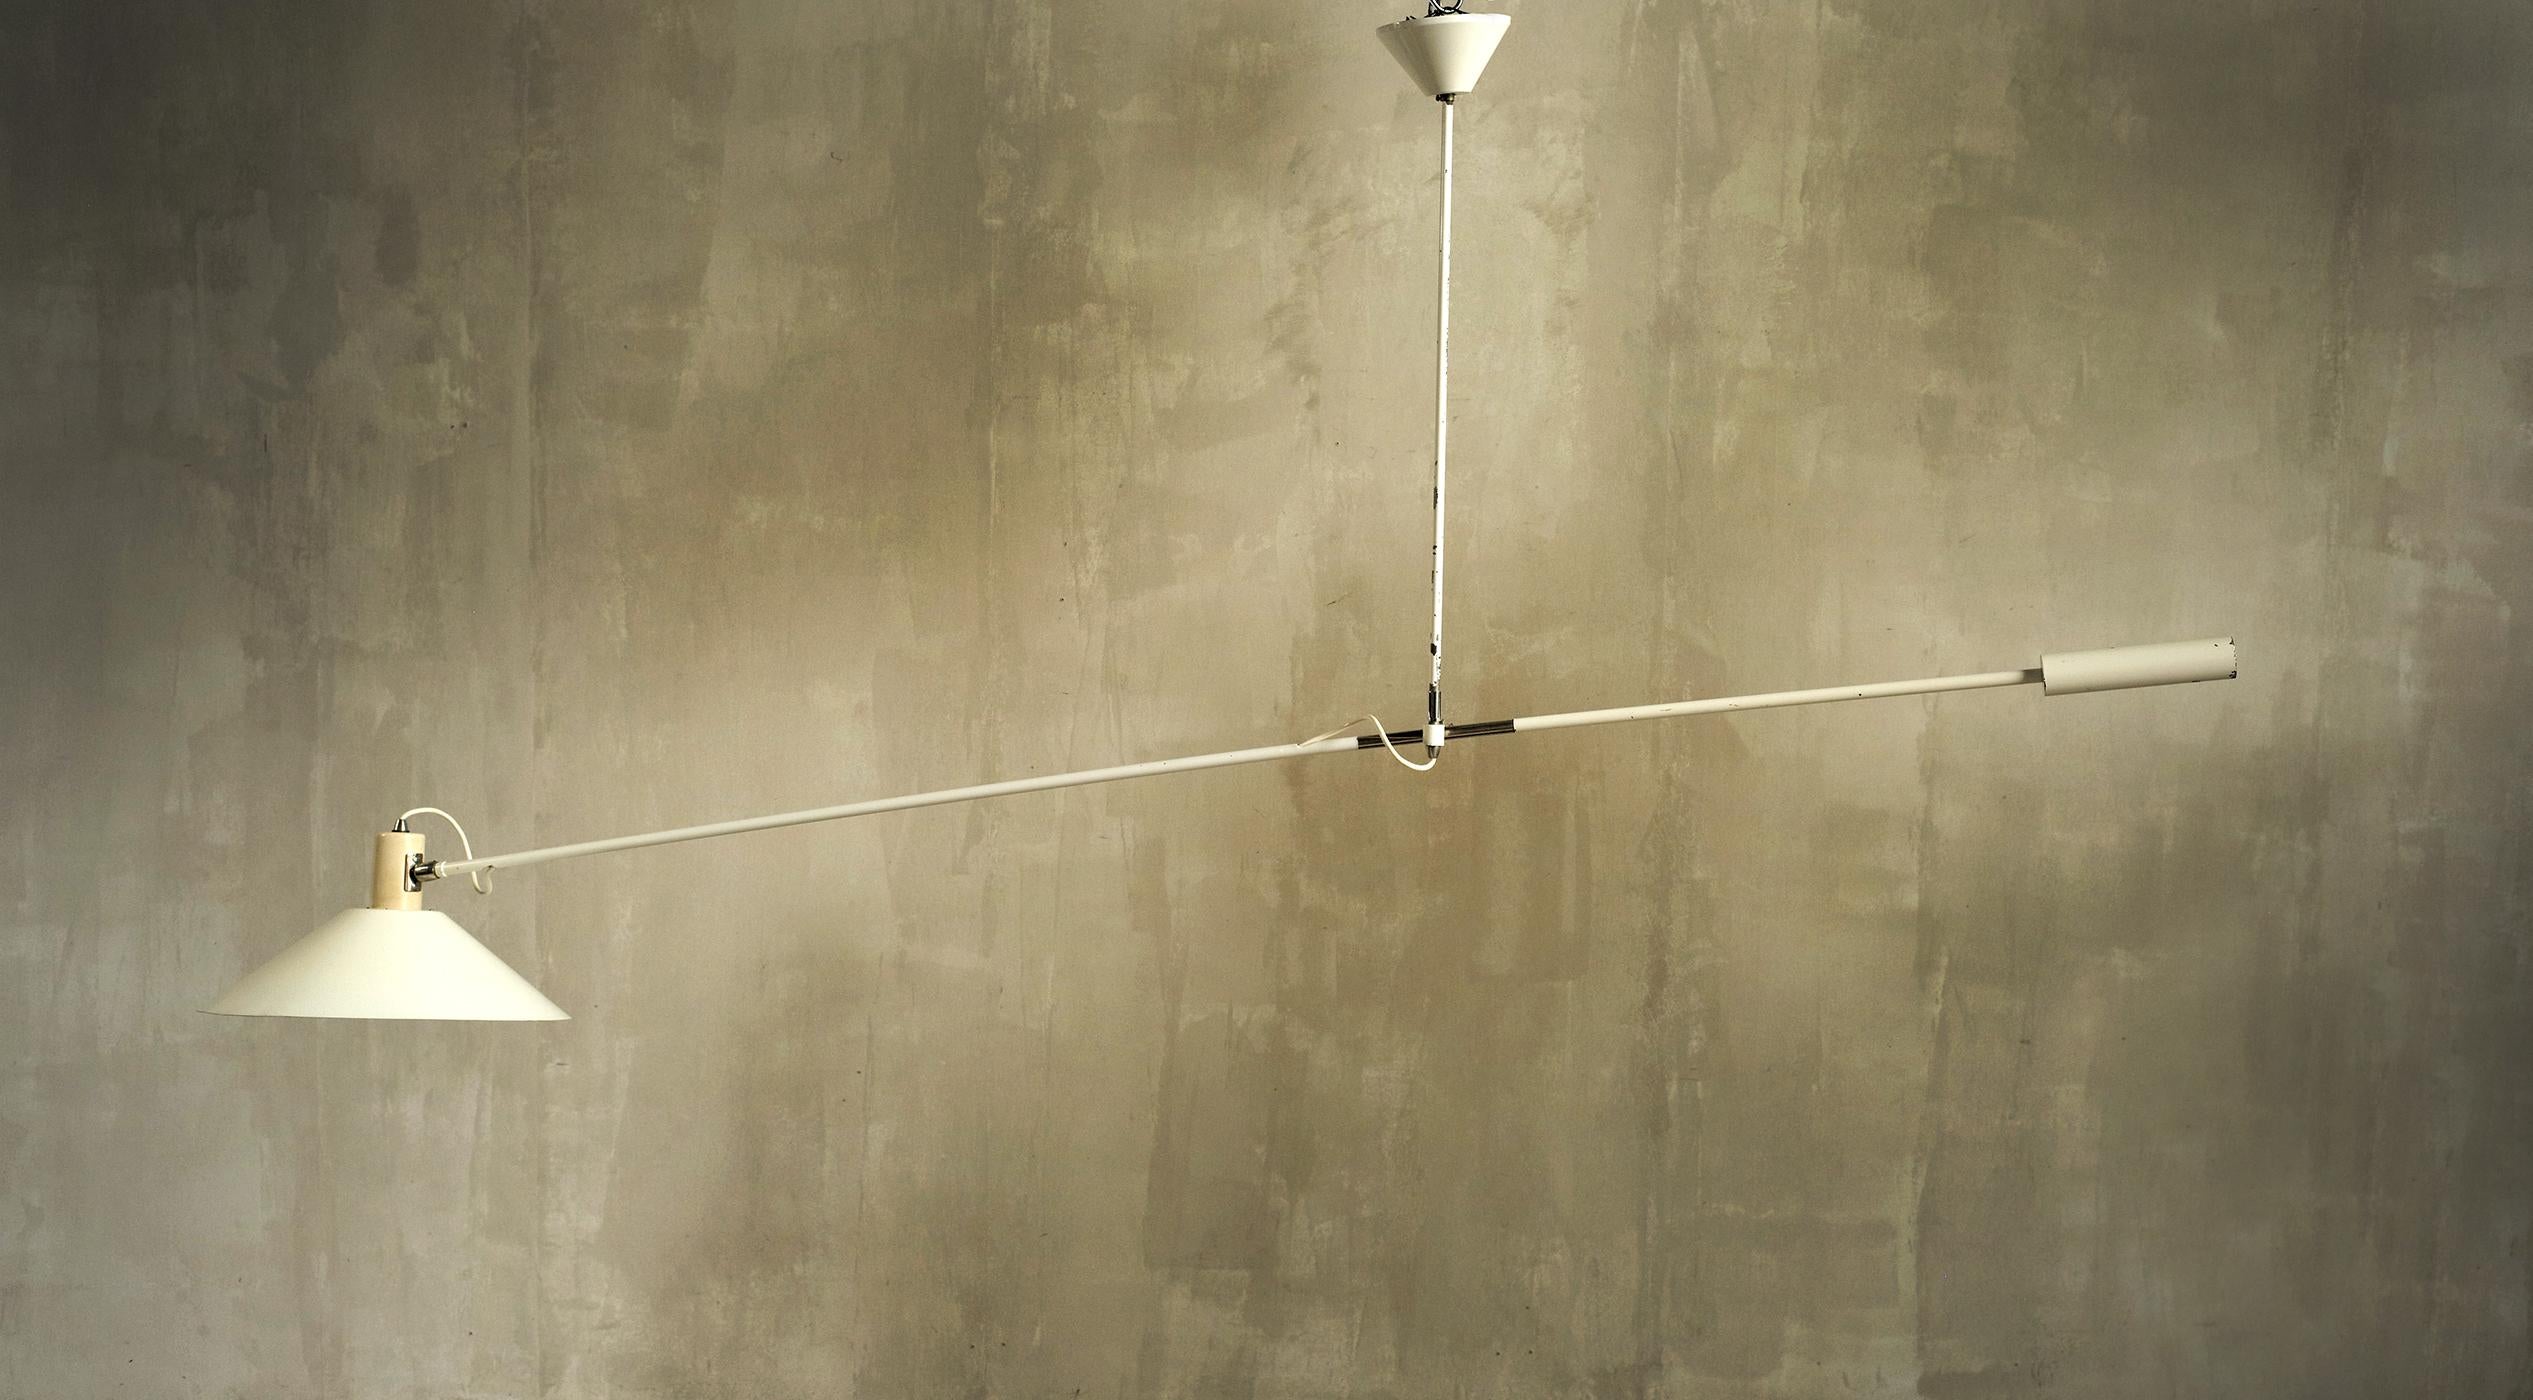 Painter and draftsman, J. J. M. Hoogervorst became a light designer after the 1939/45 war. Strongly inspired by Italian creations, notably Gino Sarfatti, he designed lights for Anvia that have now become great design classics. This pendulum